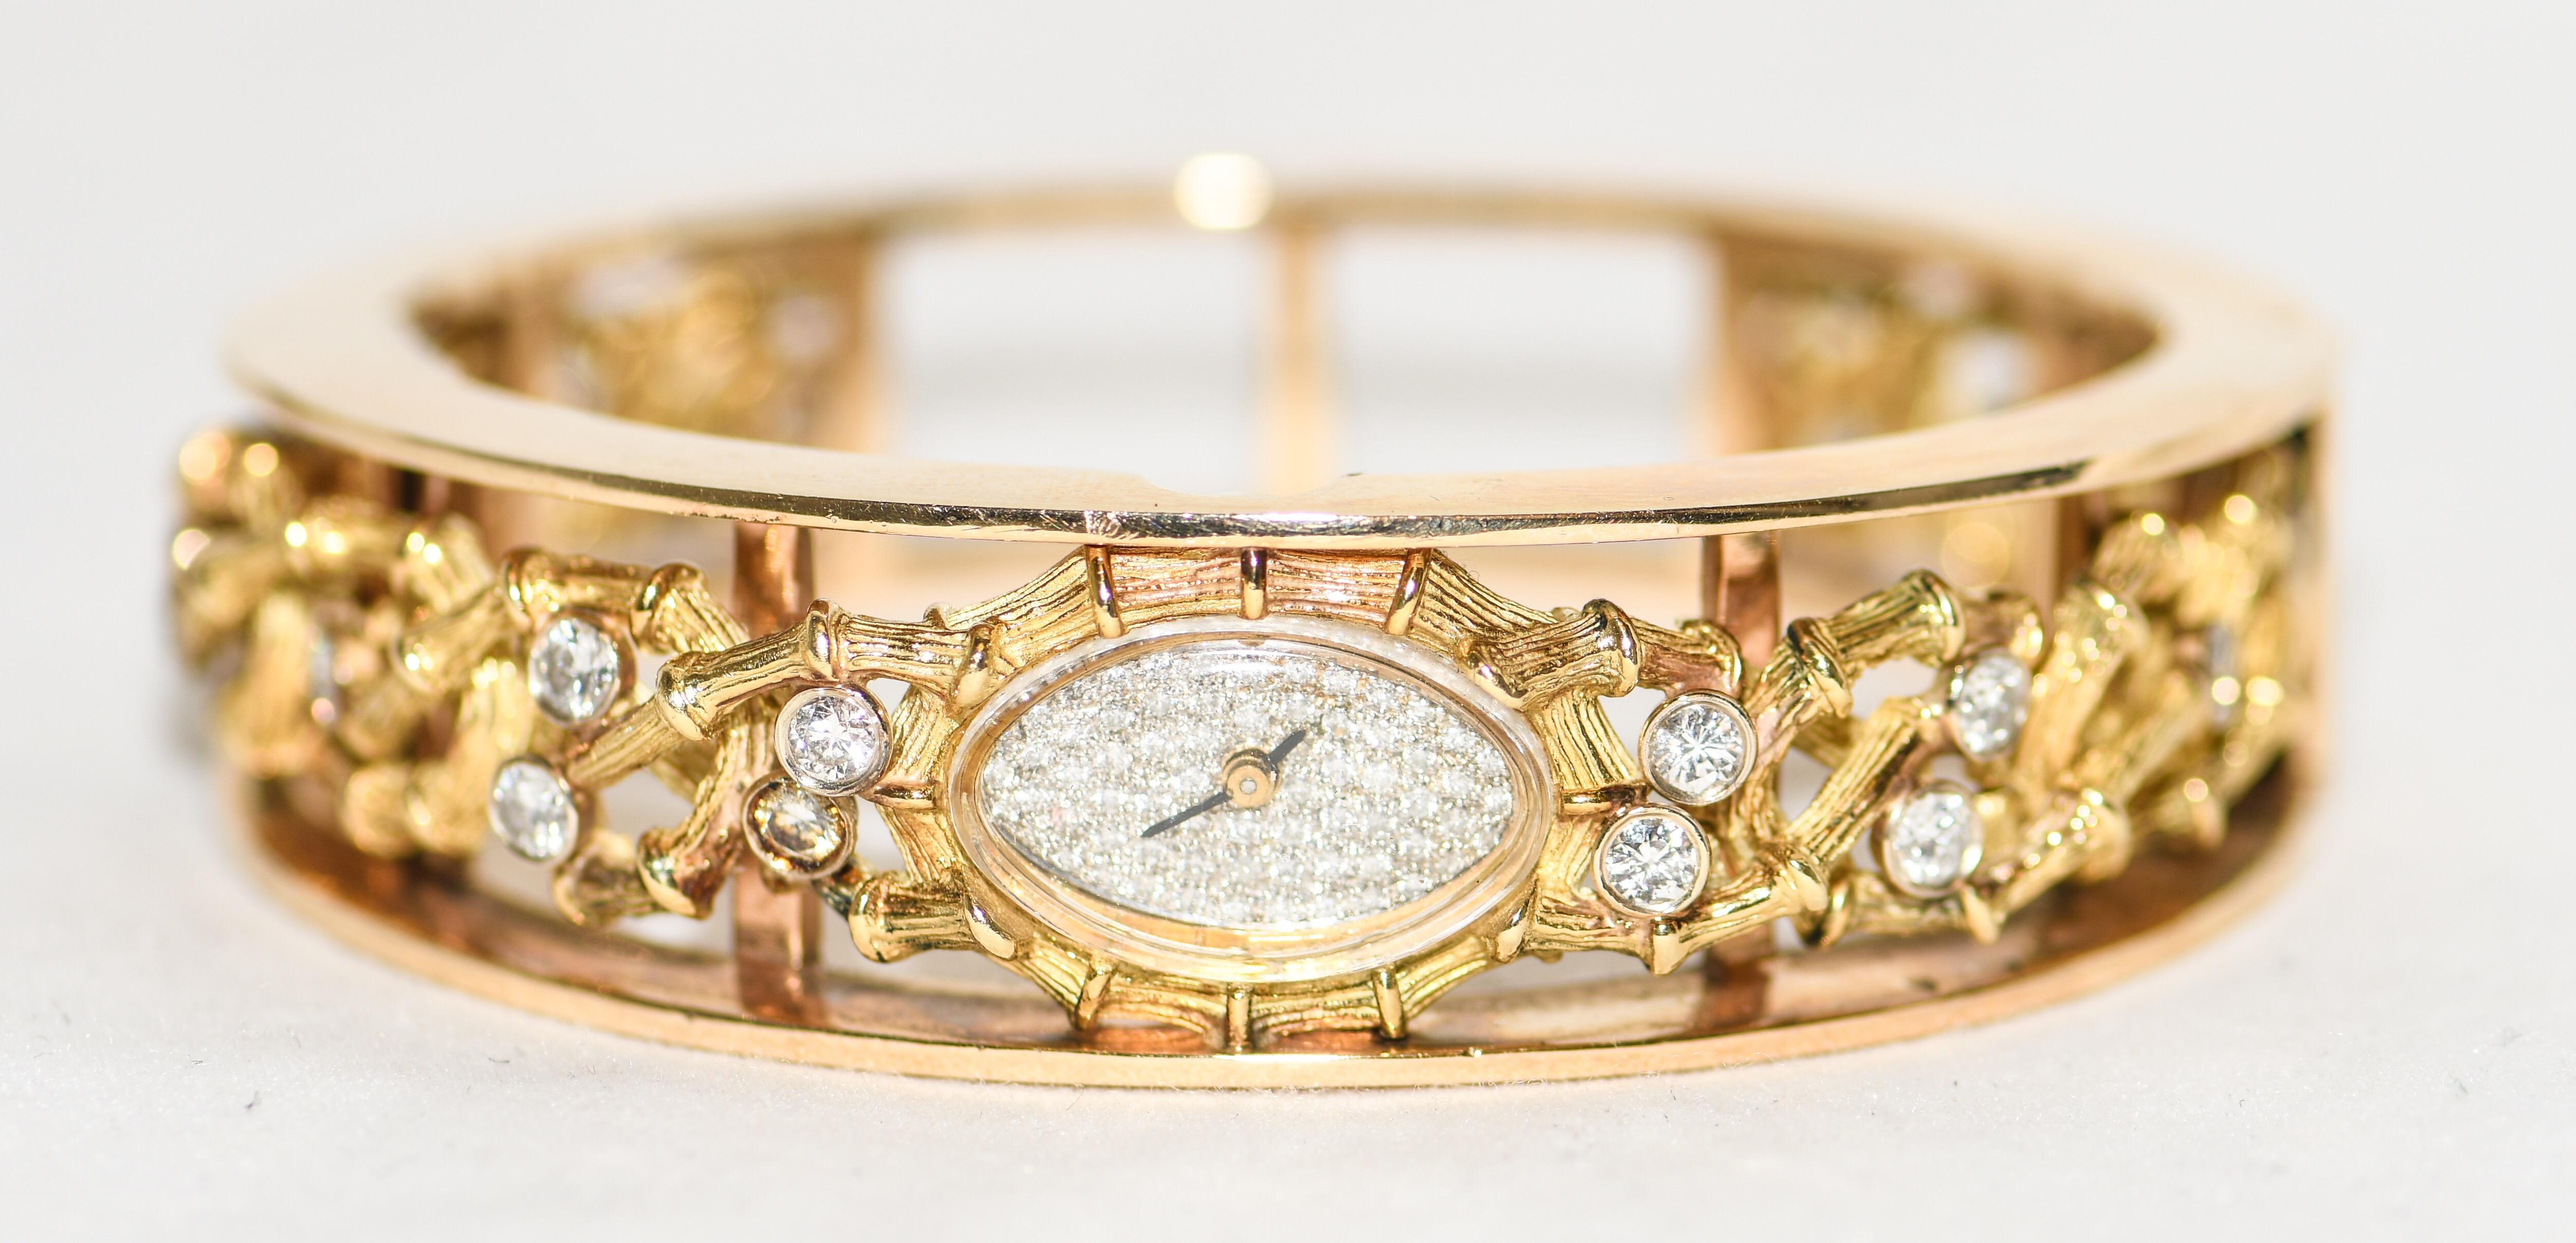 Magnificently crafted in the 1980's with 18 karat yellow gold, this bangle watch is beyond fabulous!  Focal point is the oval, micro pave diamond face watch.  Detailed frame is heavily engraved with markers for time keeping.  Open work resembles the